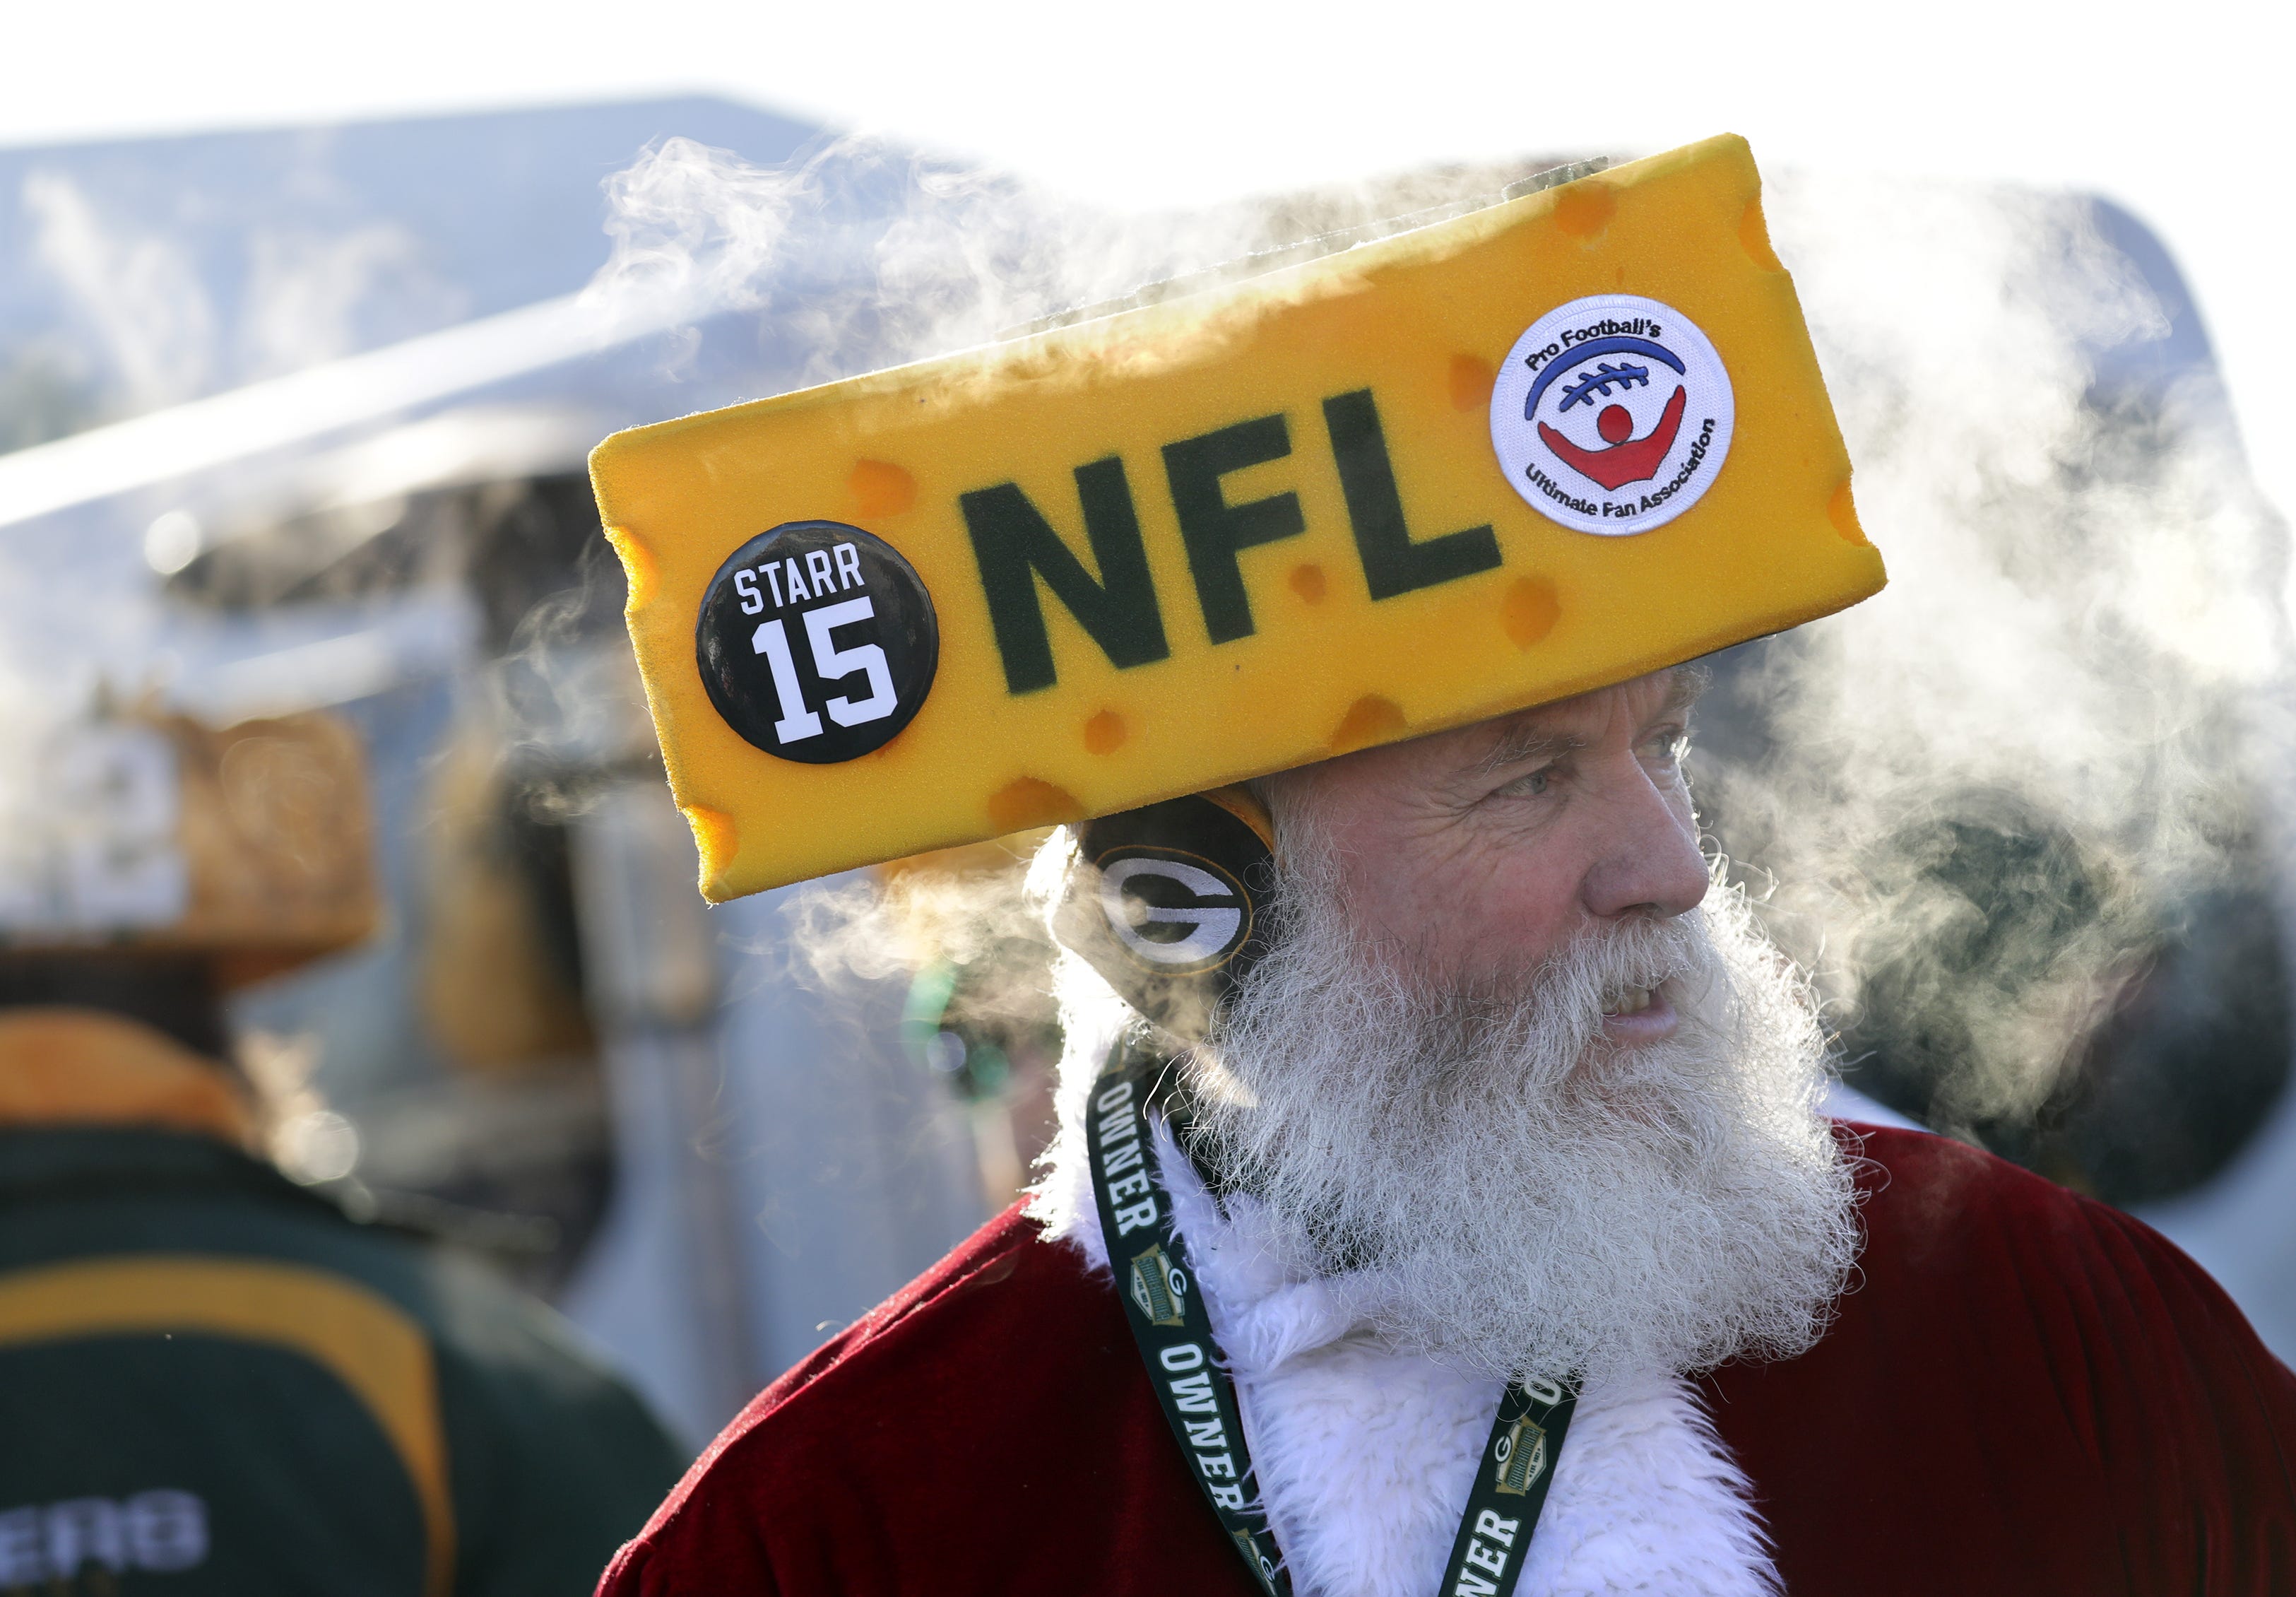 Steve Tate of DeForest dons his Santa outfit while tailgating prior to the Green Bay Packers playing against the Chicago Bears Sunday, December 15, 2019, at Lambeau Field in Green Bay, Wis.